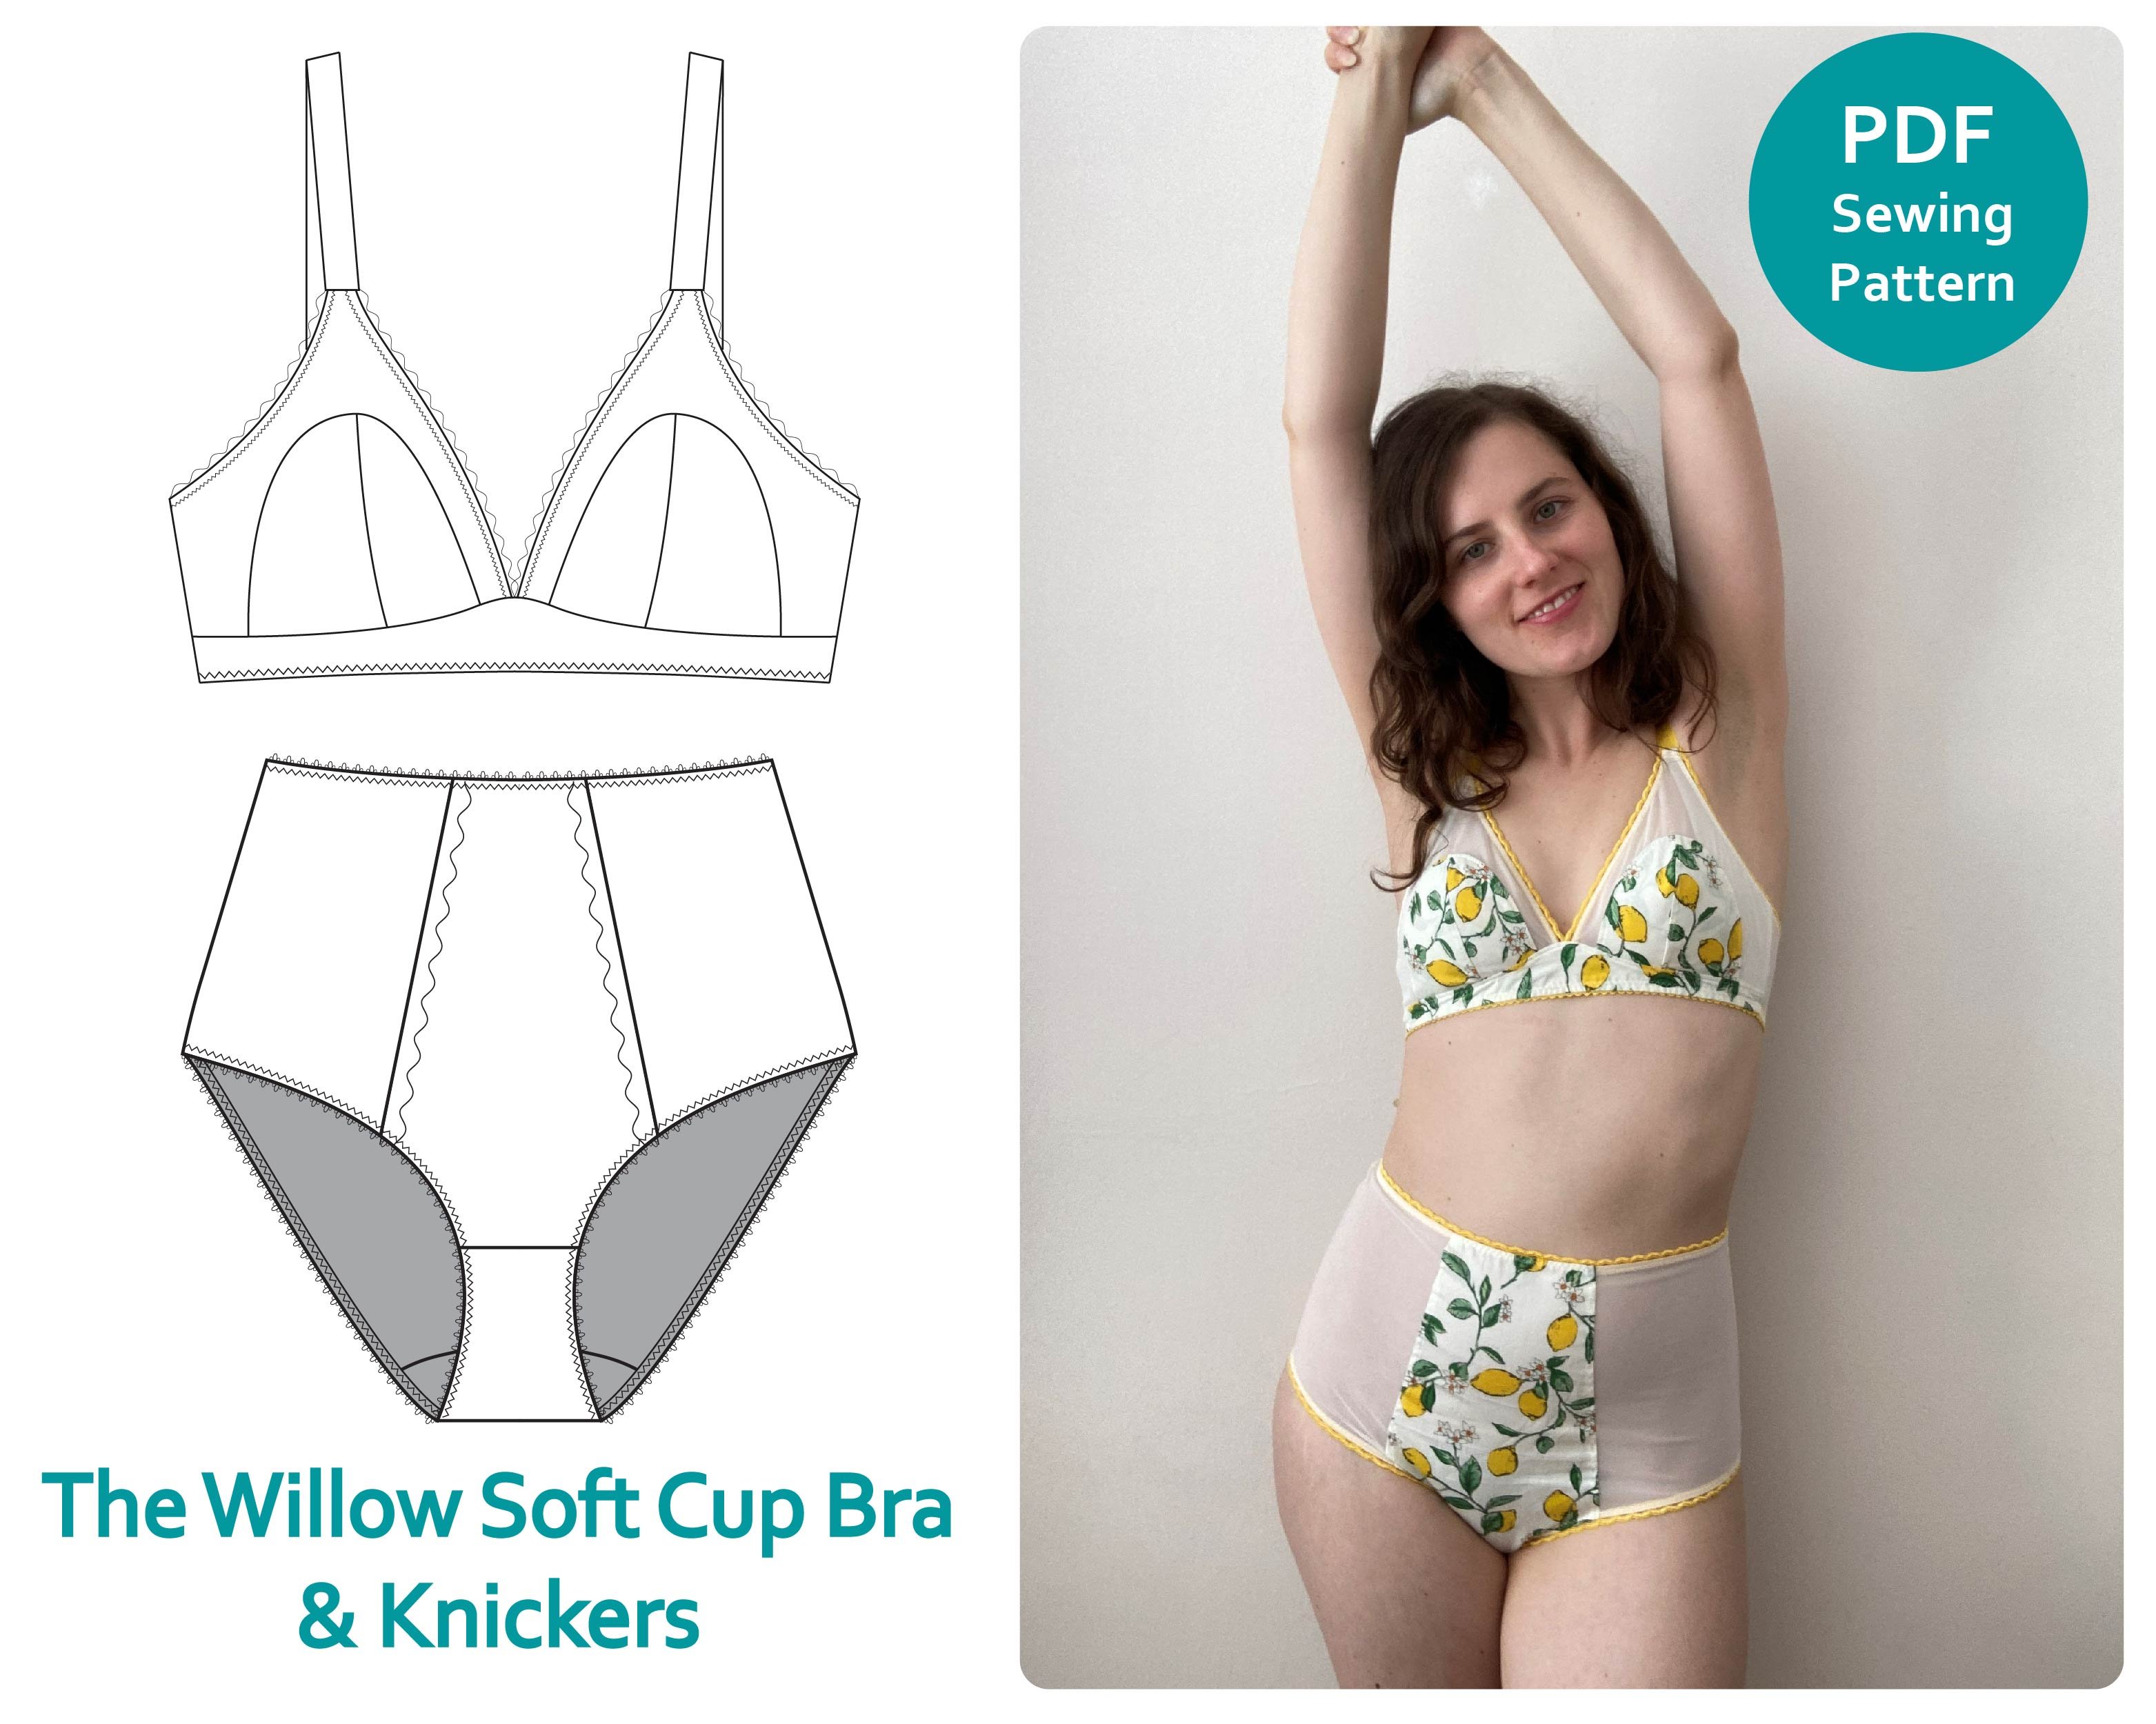 Bra Soft Cup Sewing Pattern in Full Bust Sizes DD-G UK Cup Sizes // PDF  Digital Pattern. Willow Soft Cup Bra by Sew Projects. 